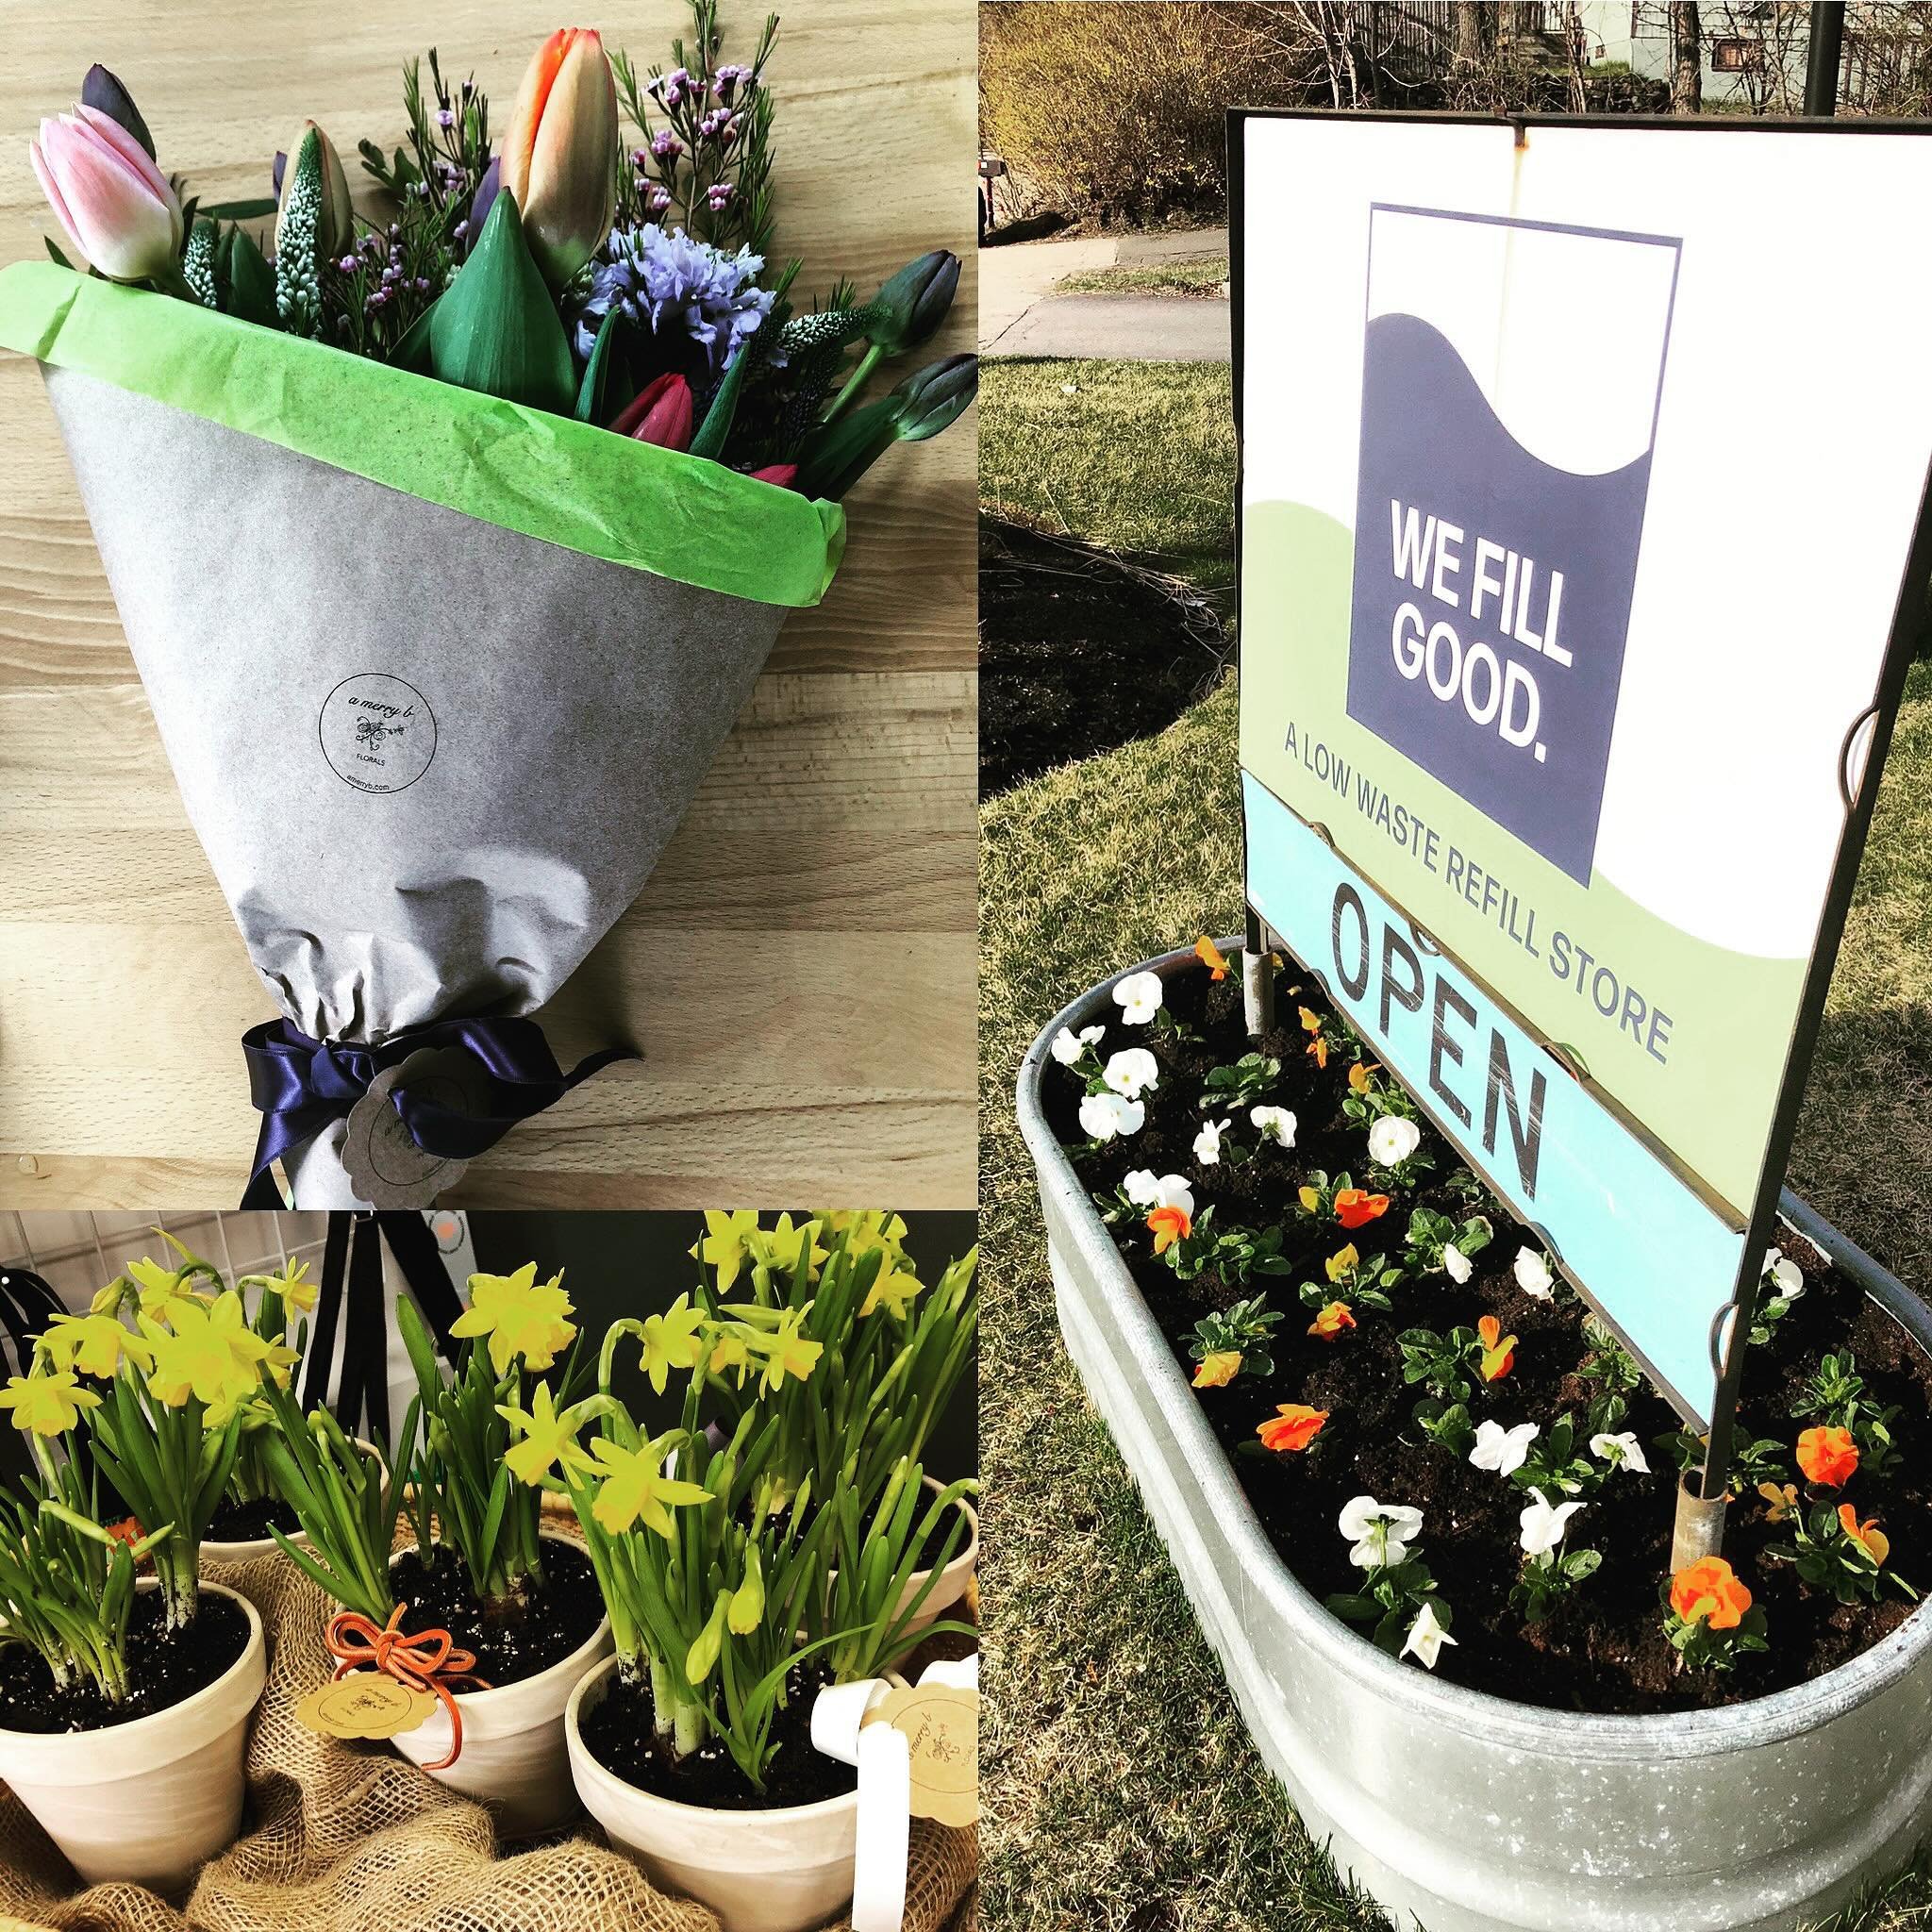 Mother&rsquo;s Day Weekend&nbsp;Pop-up
at We Fill Good.
Saturday, May 11th&nbsp;from 11:30am-3pm
a merry b florals will be returning to &nbsp;WE FILL GOOD. in Kittery with some spring floral bouquets, @seapoint_chandlers Seapoint Chandlers Botanical 